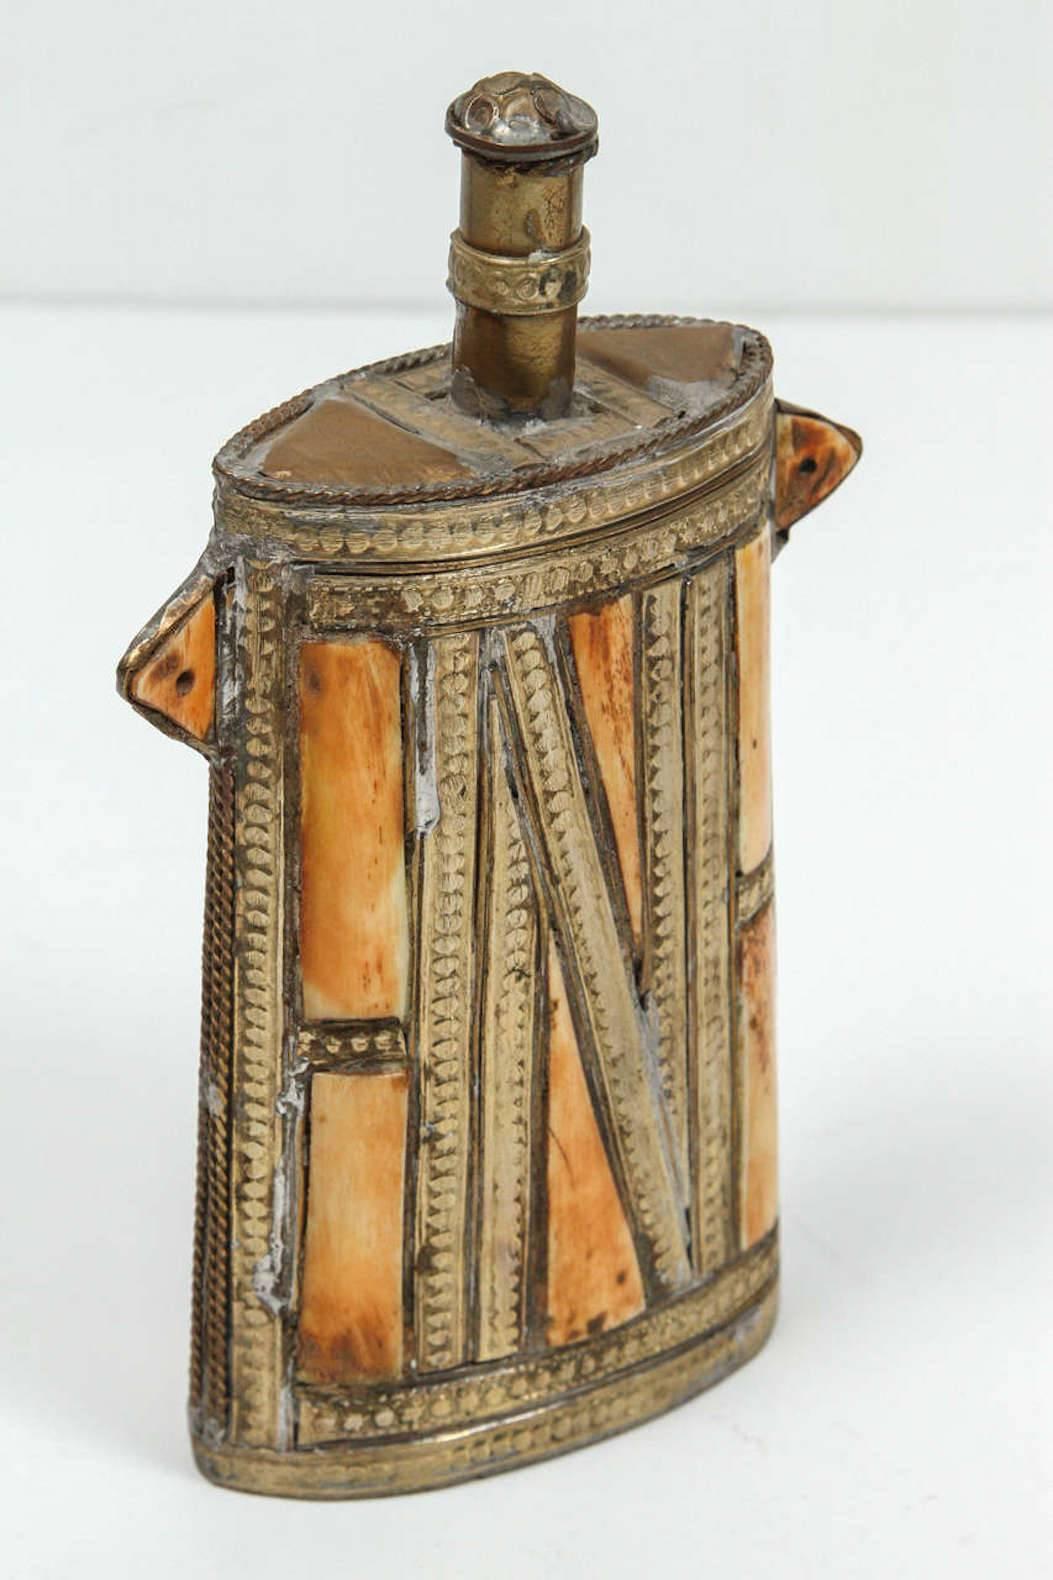 Great decorative Moroccan Tribal  flask..
African decorative brass with front richly decorated with embossed brass and overlay.
The valve stem turns and open.
Truly a conversation museum piece of Moroccan decorative brass tribal Folk Art.